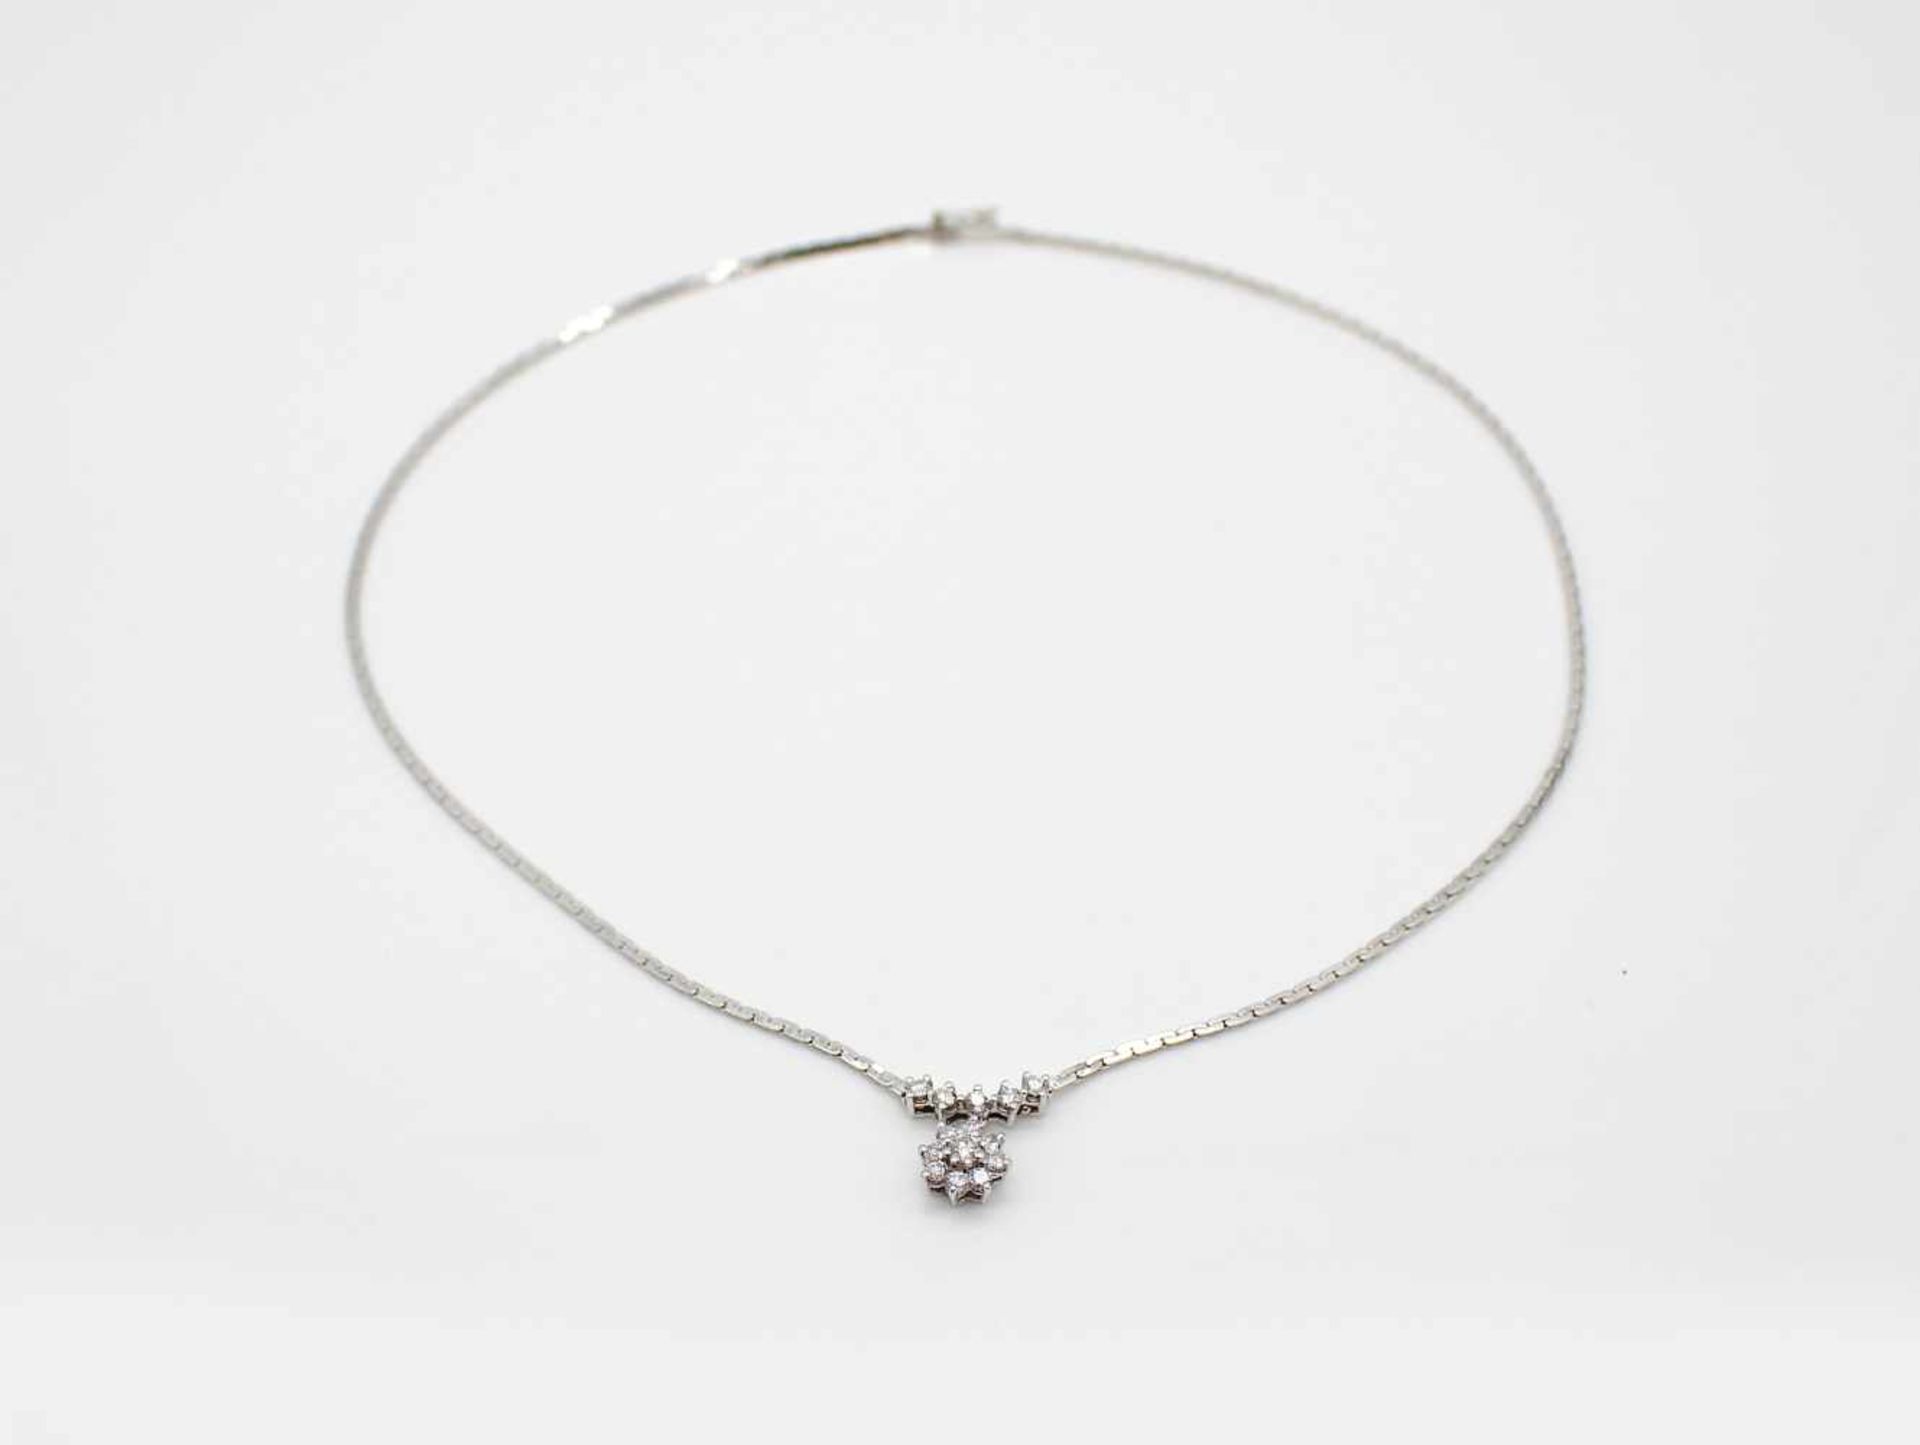 Necklace in 585 white gold with 14 brilliant-cut diamonds, total approx. 0.50 ct., high degree of - Bild 2 aus 3